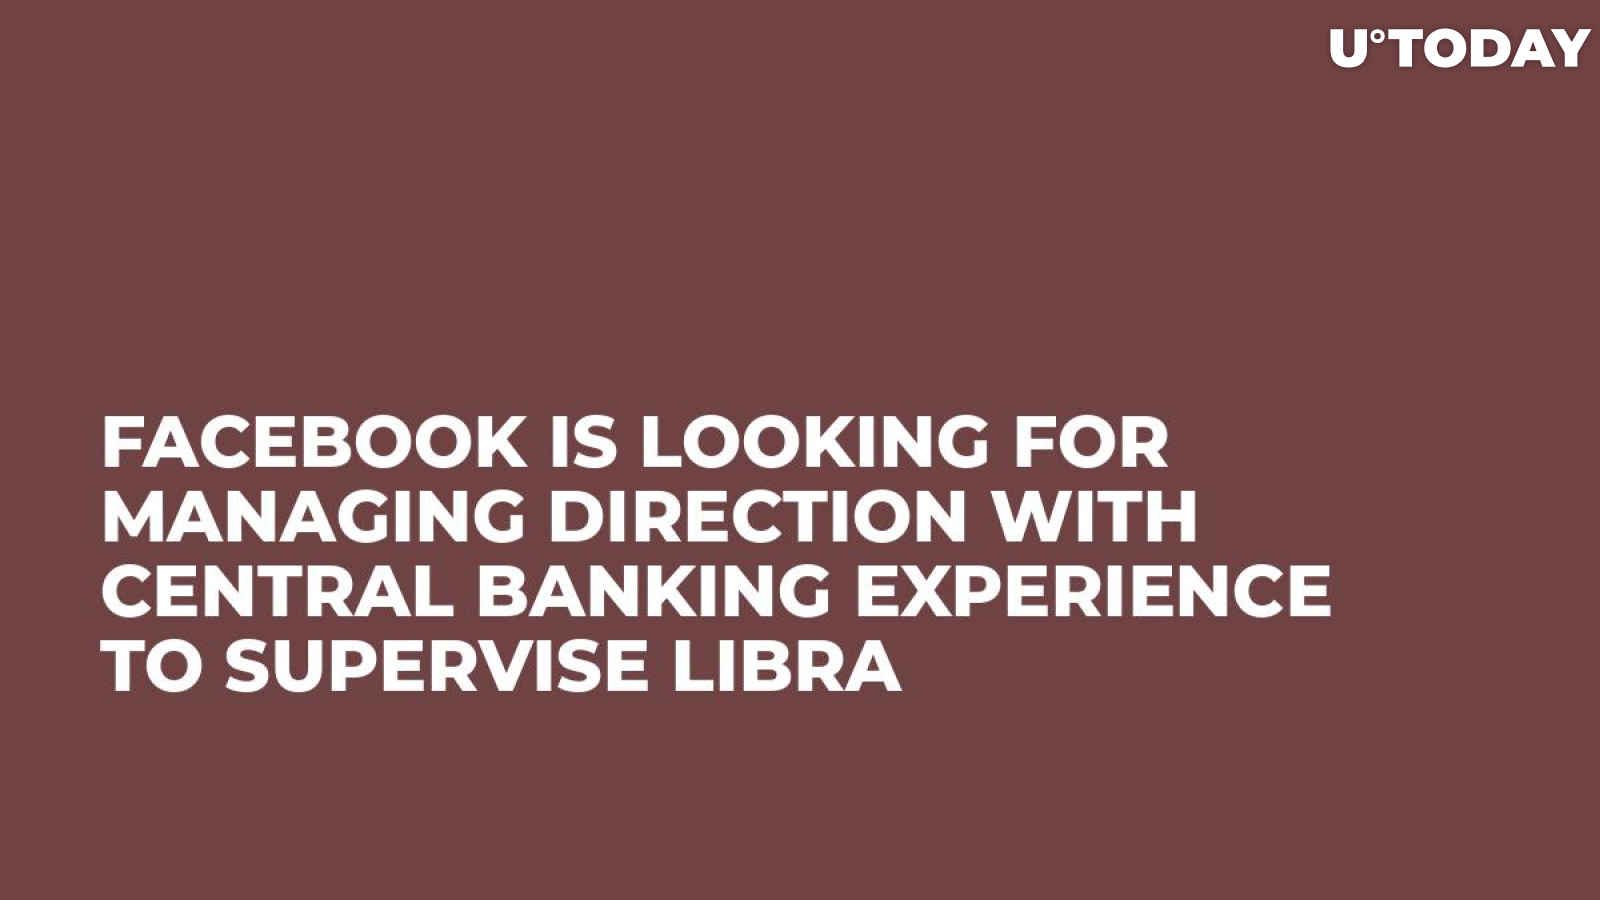 Facebook Is Looking for Managing Direction with Central Banking Experience to Supervise Libra